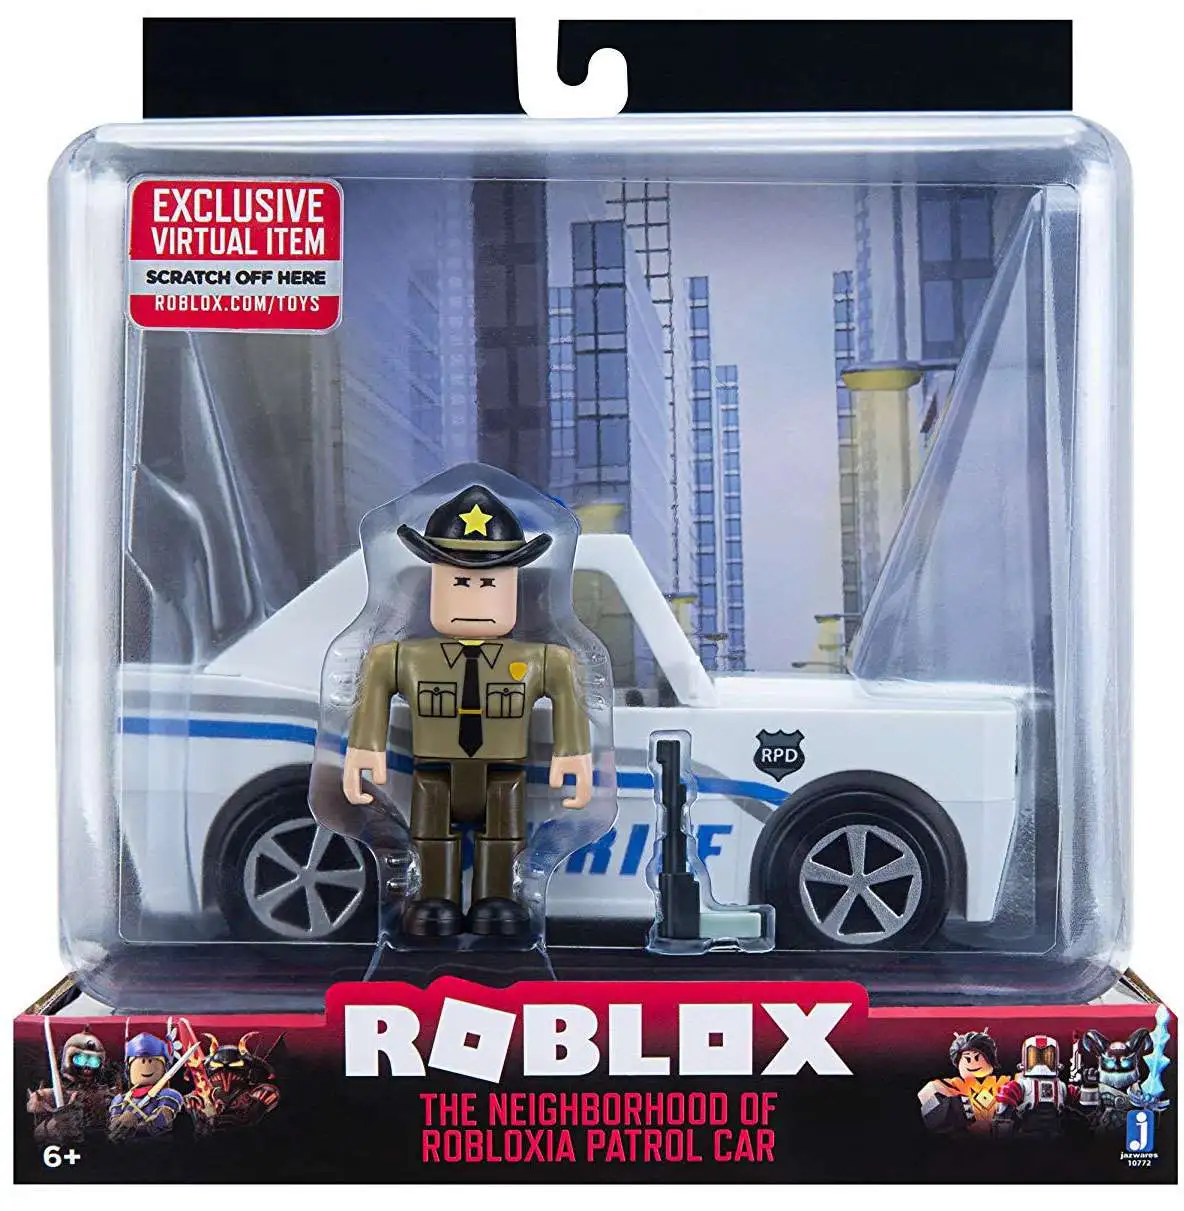 Lot of Lego Mix Roblox Action Figures with Swat Car